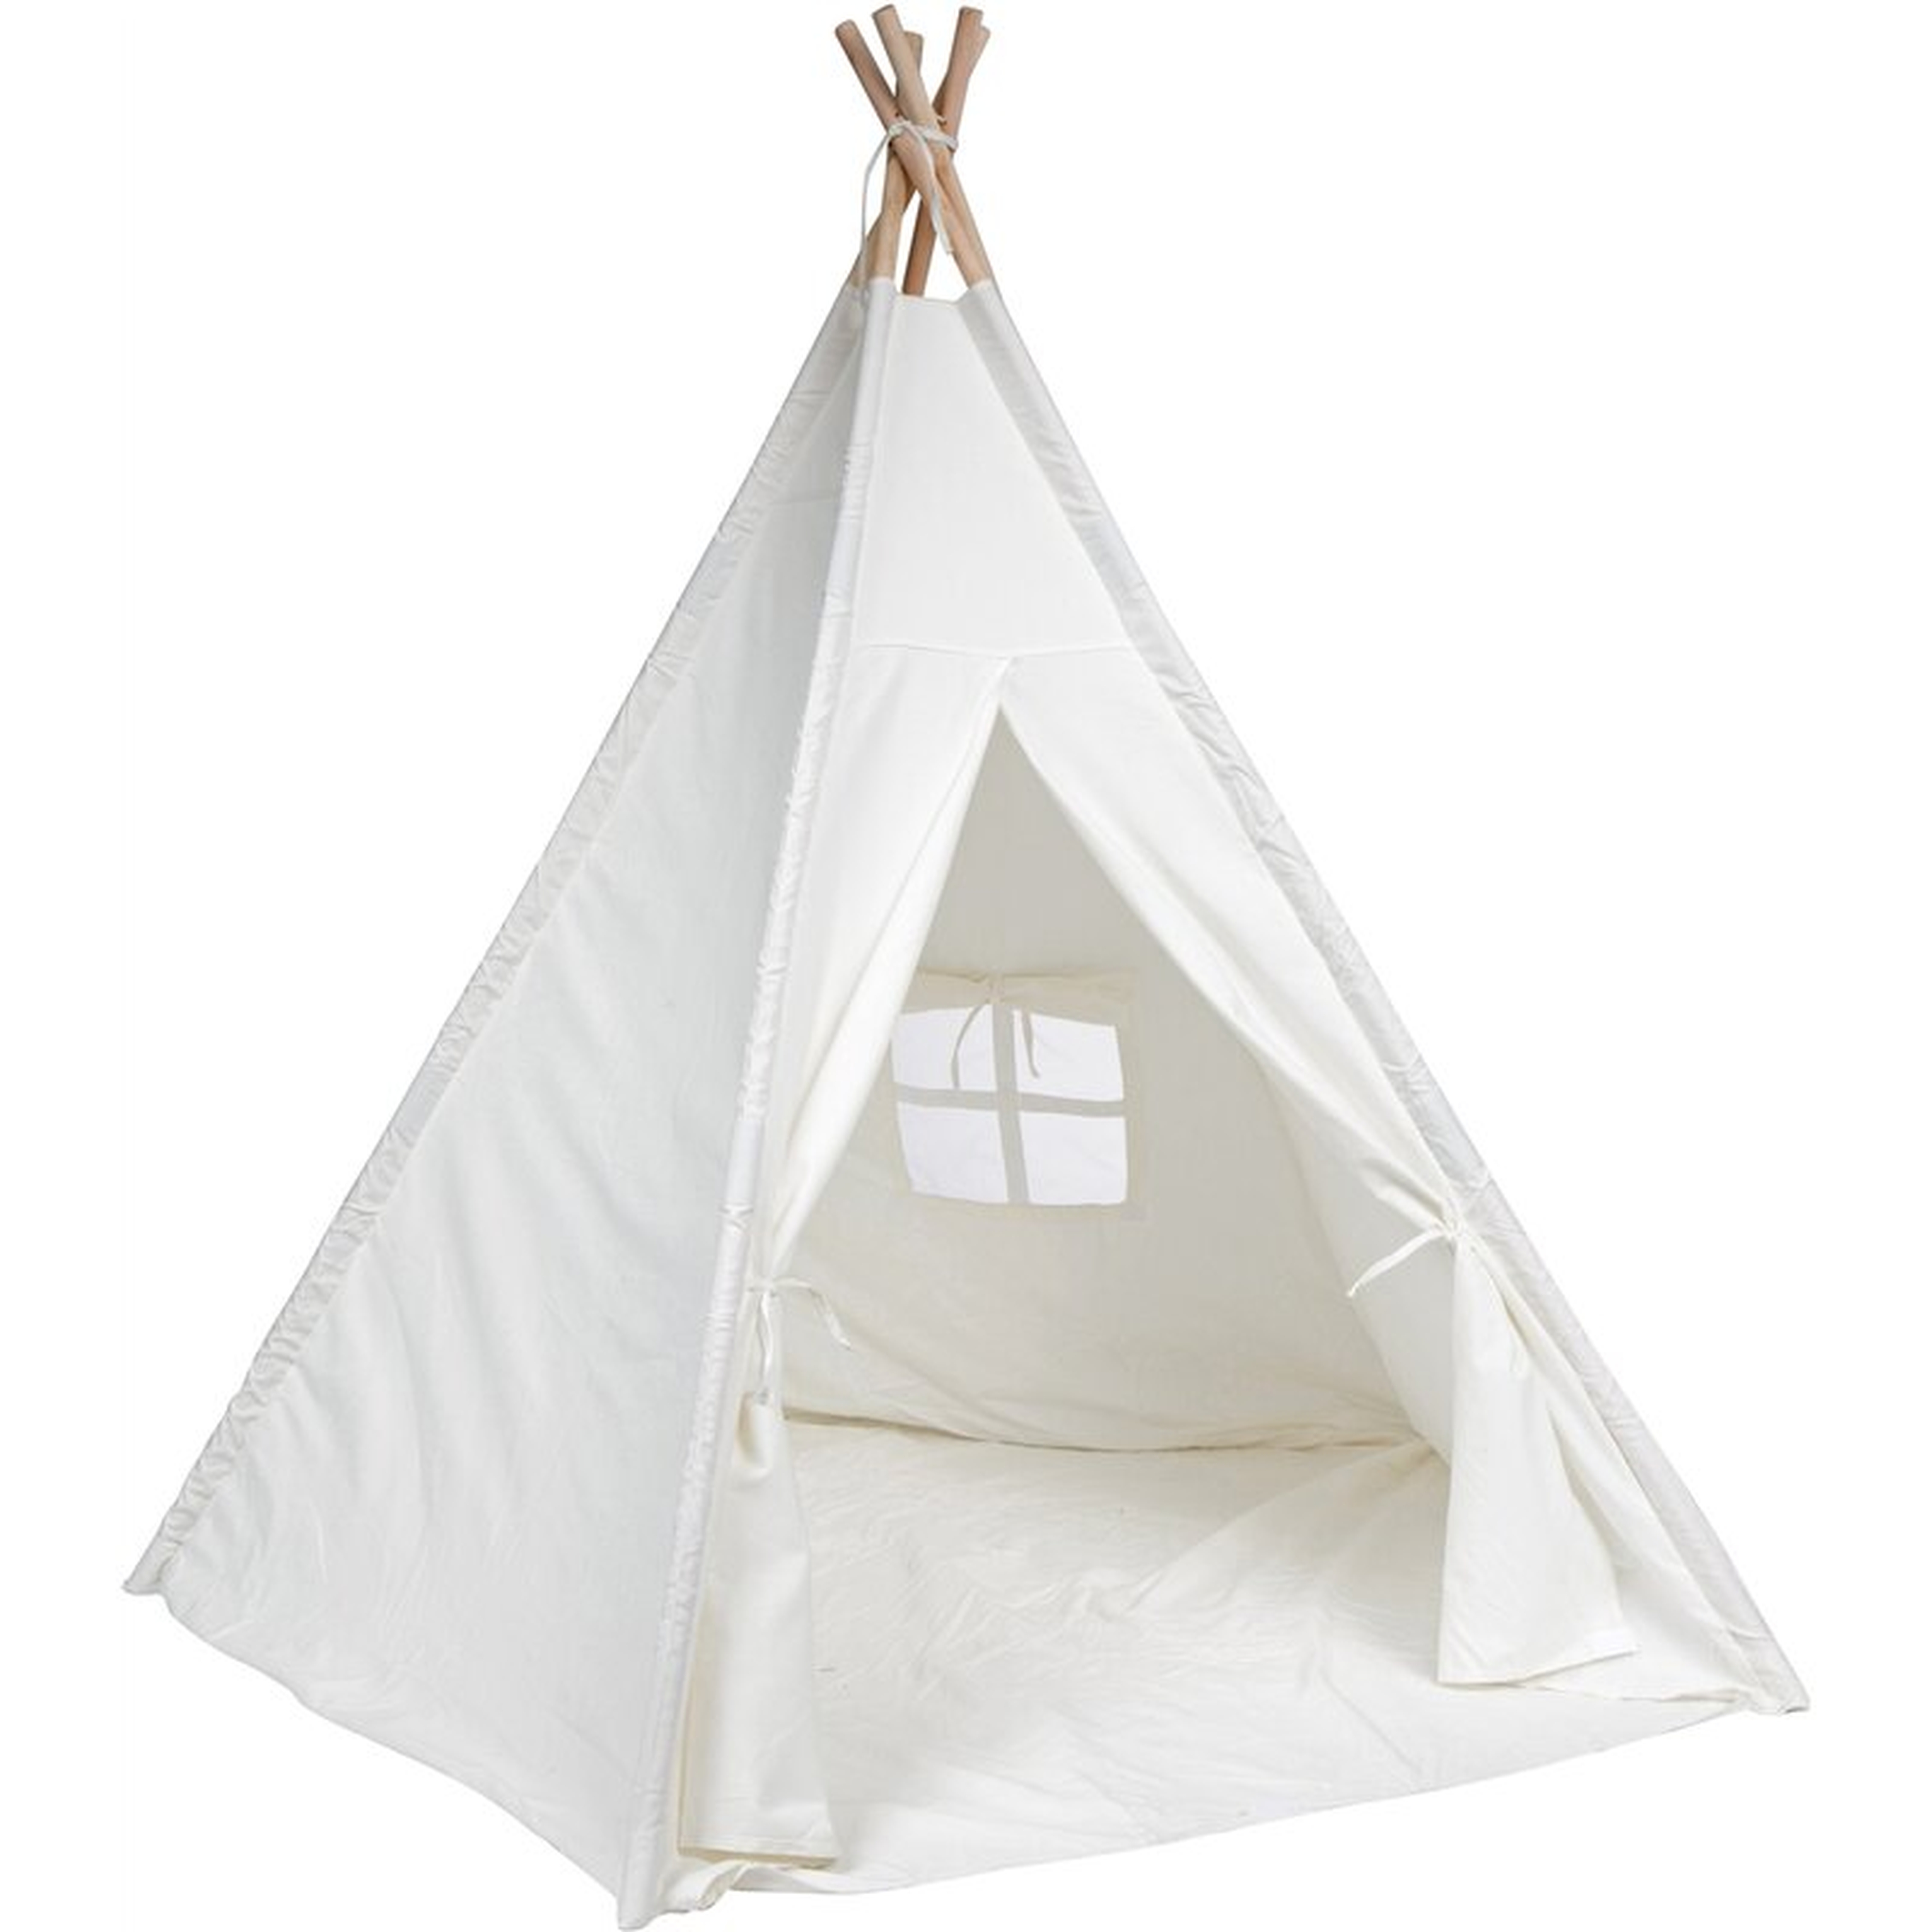 Authentic Giant Triangular Play Tent with Carrying Bag - Wayfair